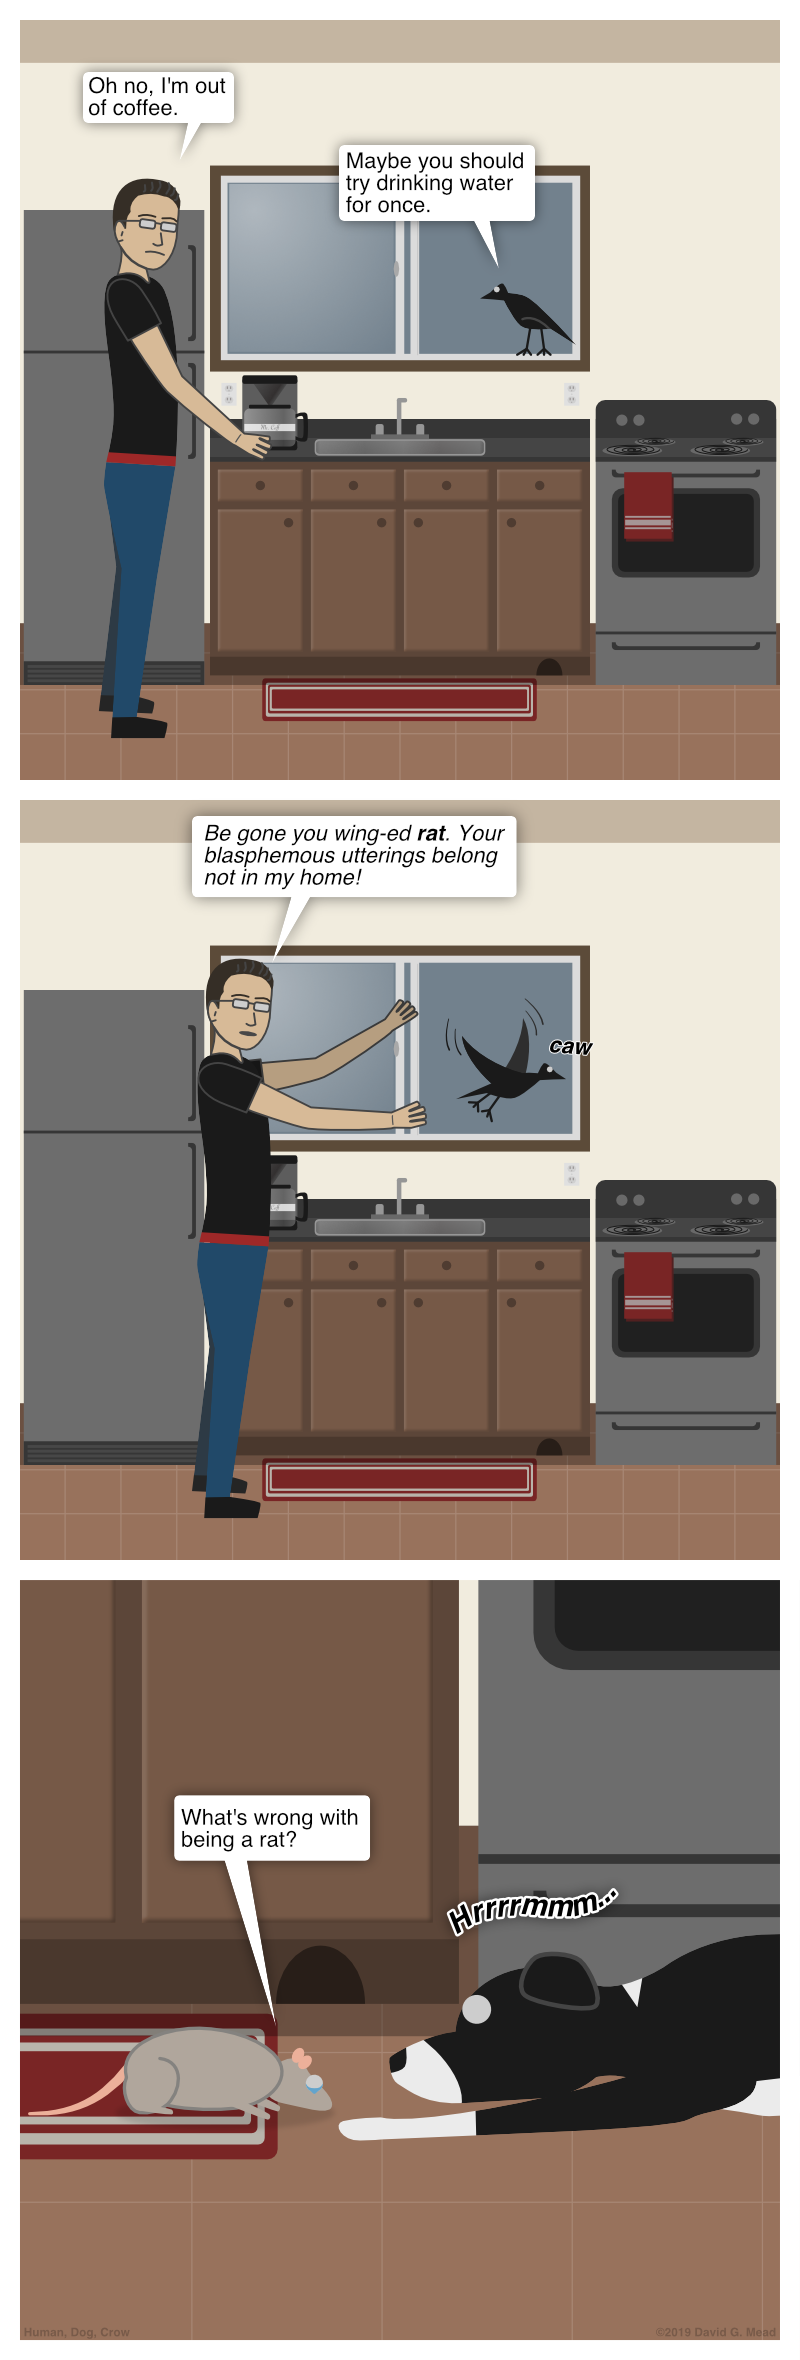 Human and Crow are in the kitchen. Human reaches for coffee but sees that it's all gone. Human says, "Oh no, I'm out of coffee." Crow responds, "Maybe you could try drinking water for once." Human replies, "Begone you wing-ed rat, Your blasphemous ways belong not in my home!" Crow flies off in and caws. Rat then asks Dog, "What's wrong with being a rat?"